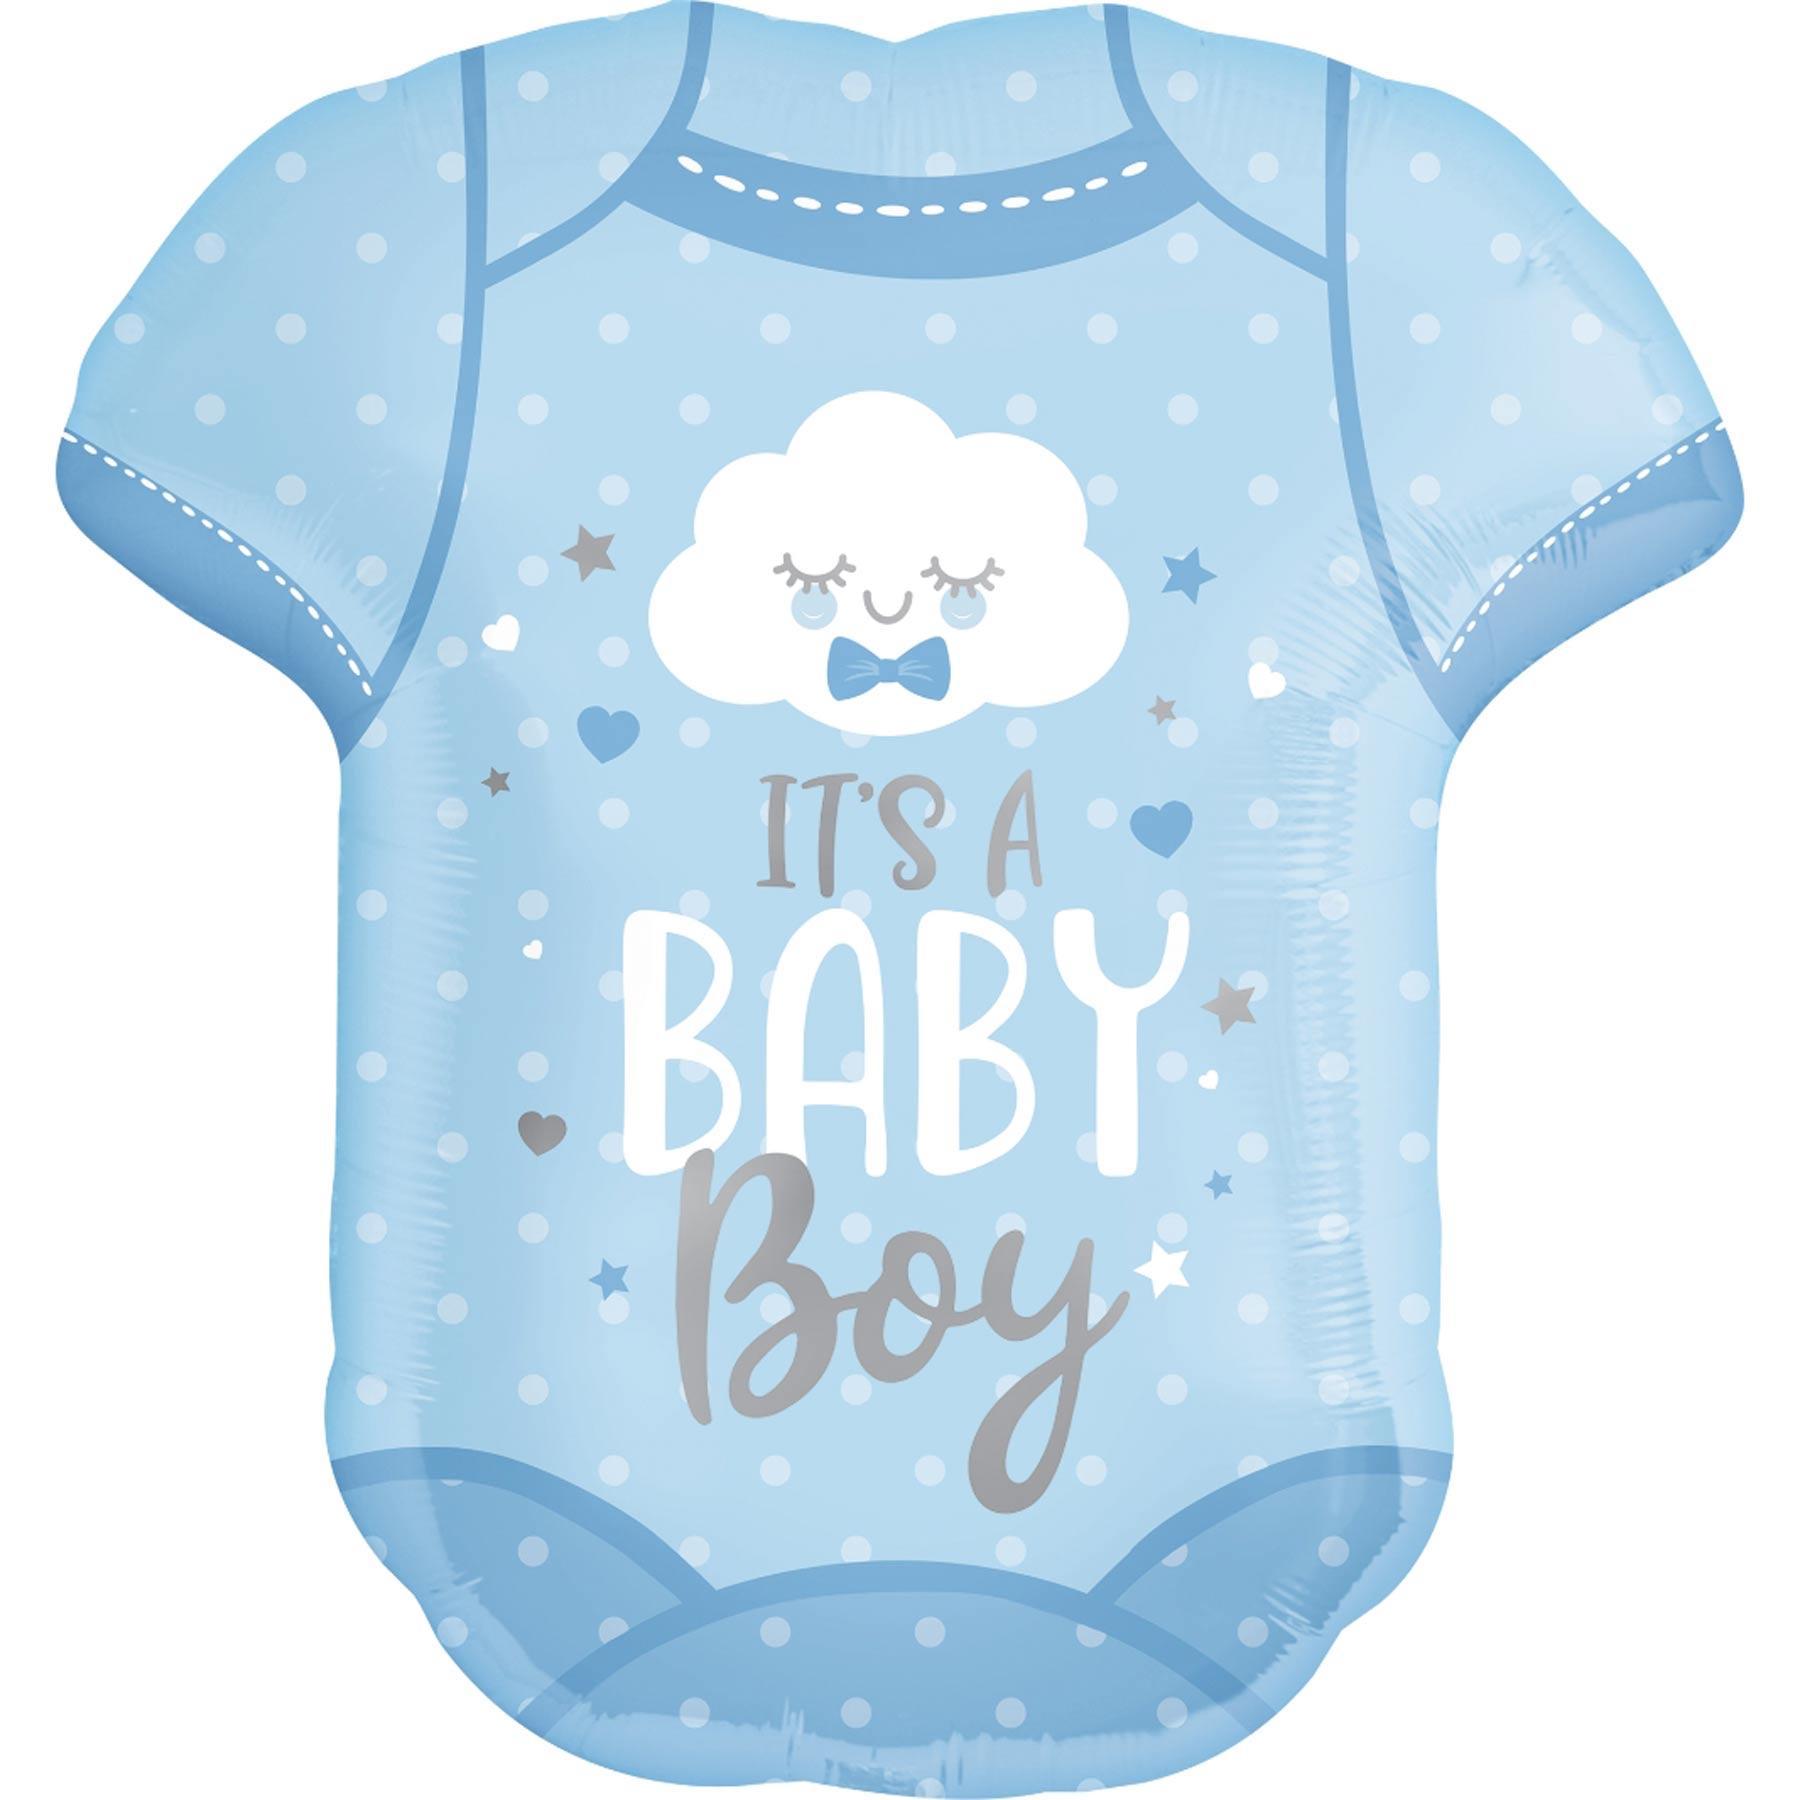 Baby Boy Onesie SuperShape Balloon 55x60cm Balloons & Streamers - Party Centre - Party Centre